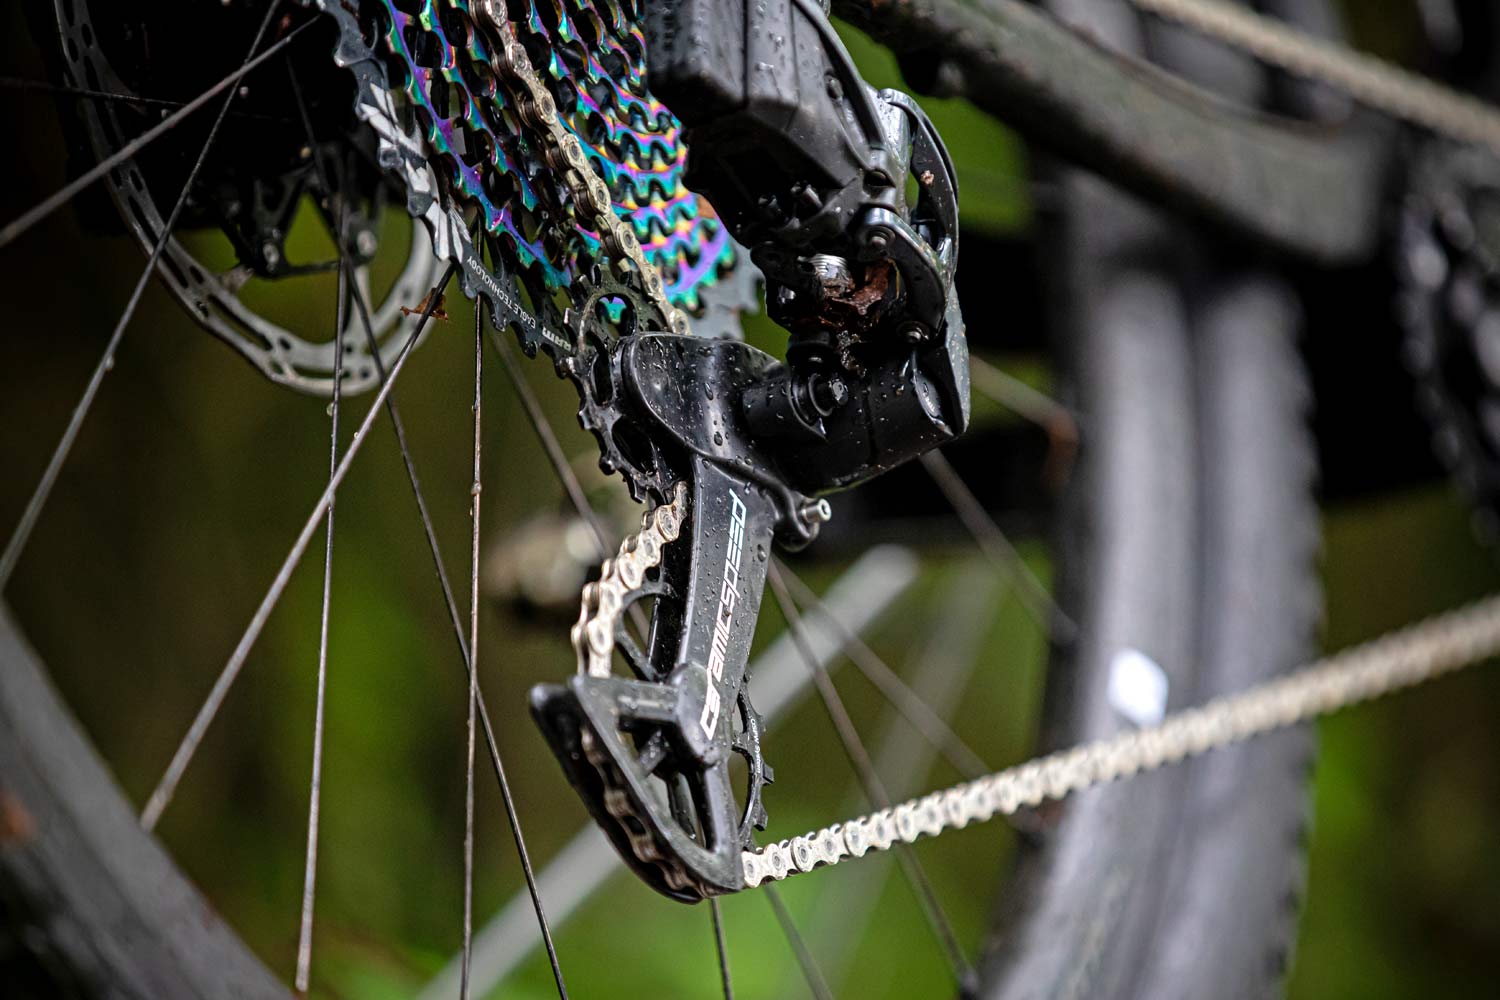 CeramicSpeed OSPW X Eagle expands fast derailleur upgrades further Off-Road